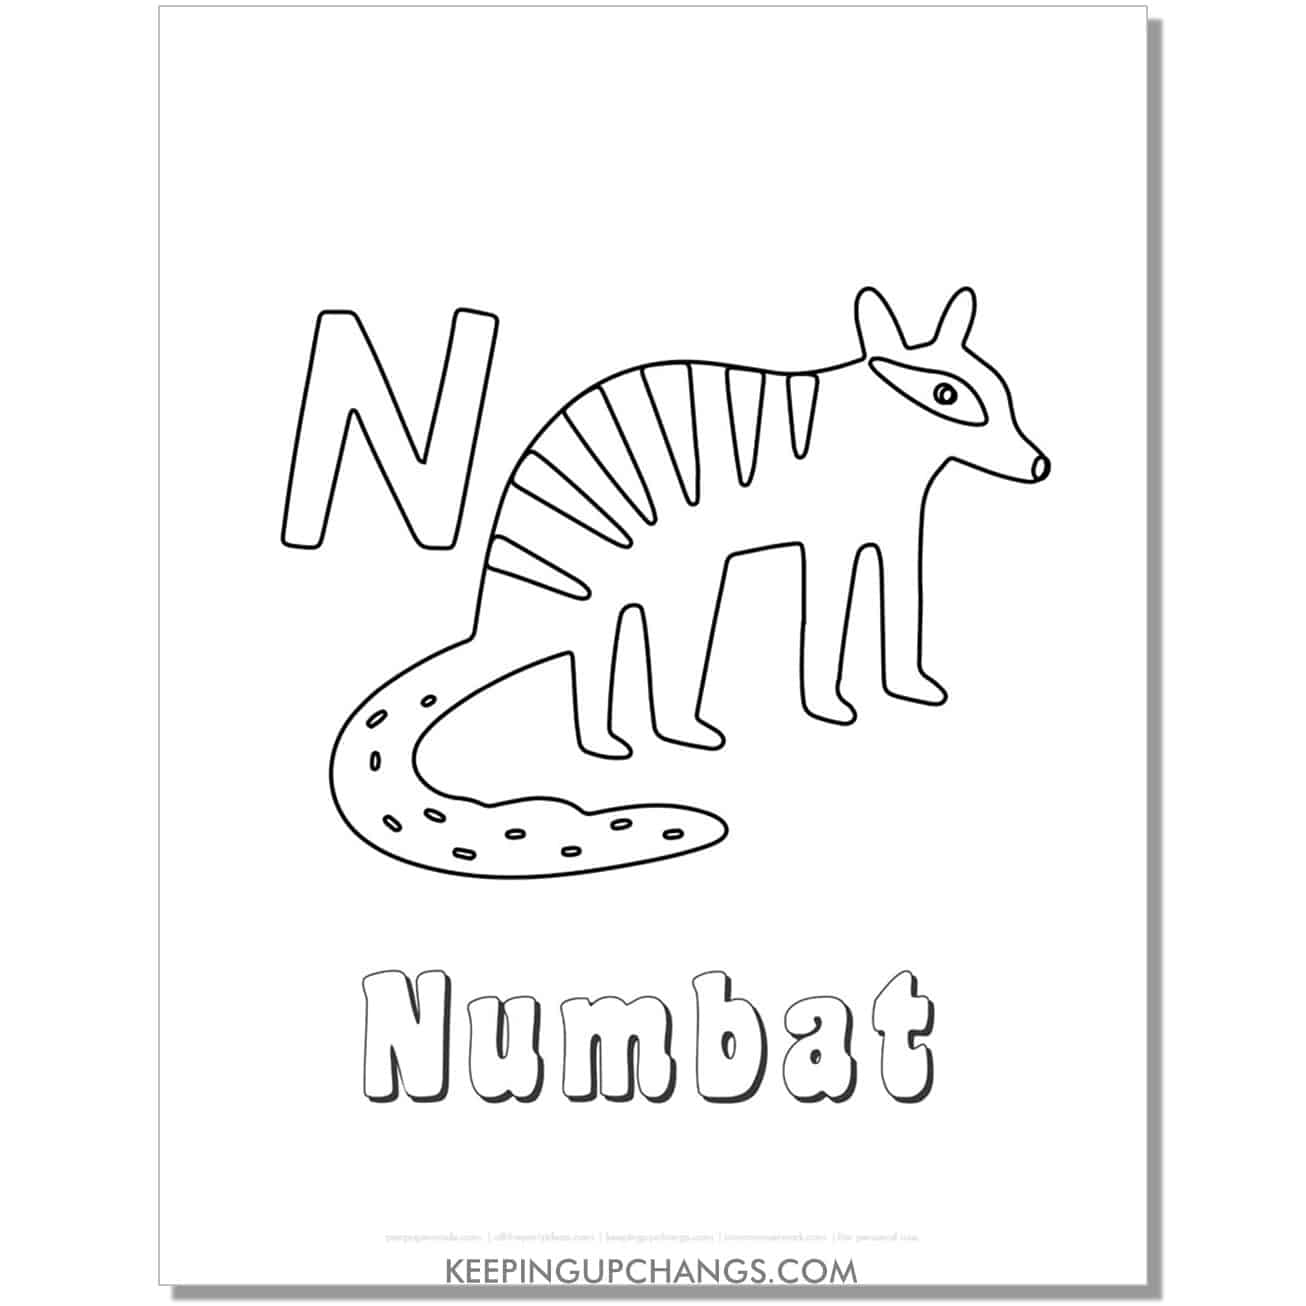 fun abc n coloring page with numbat hand drawing.